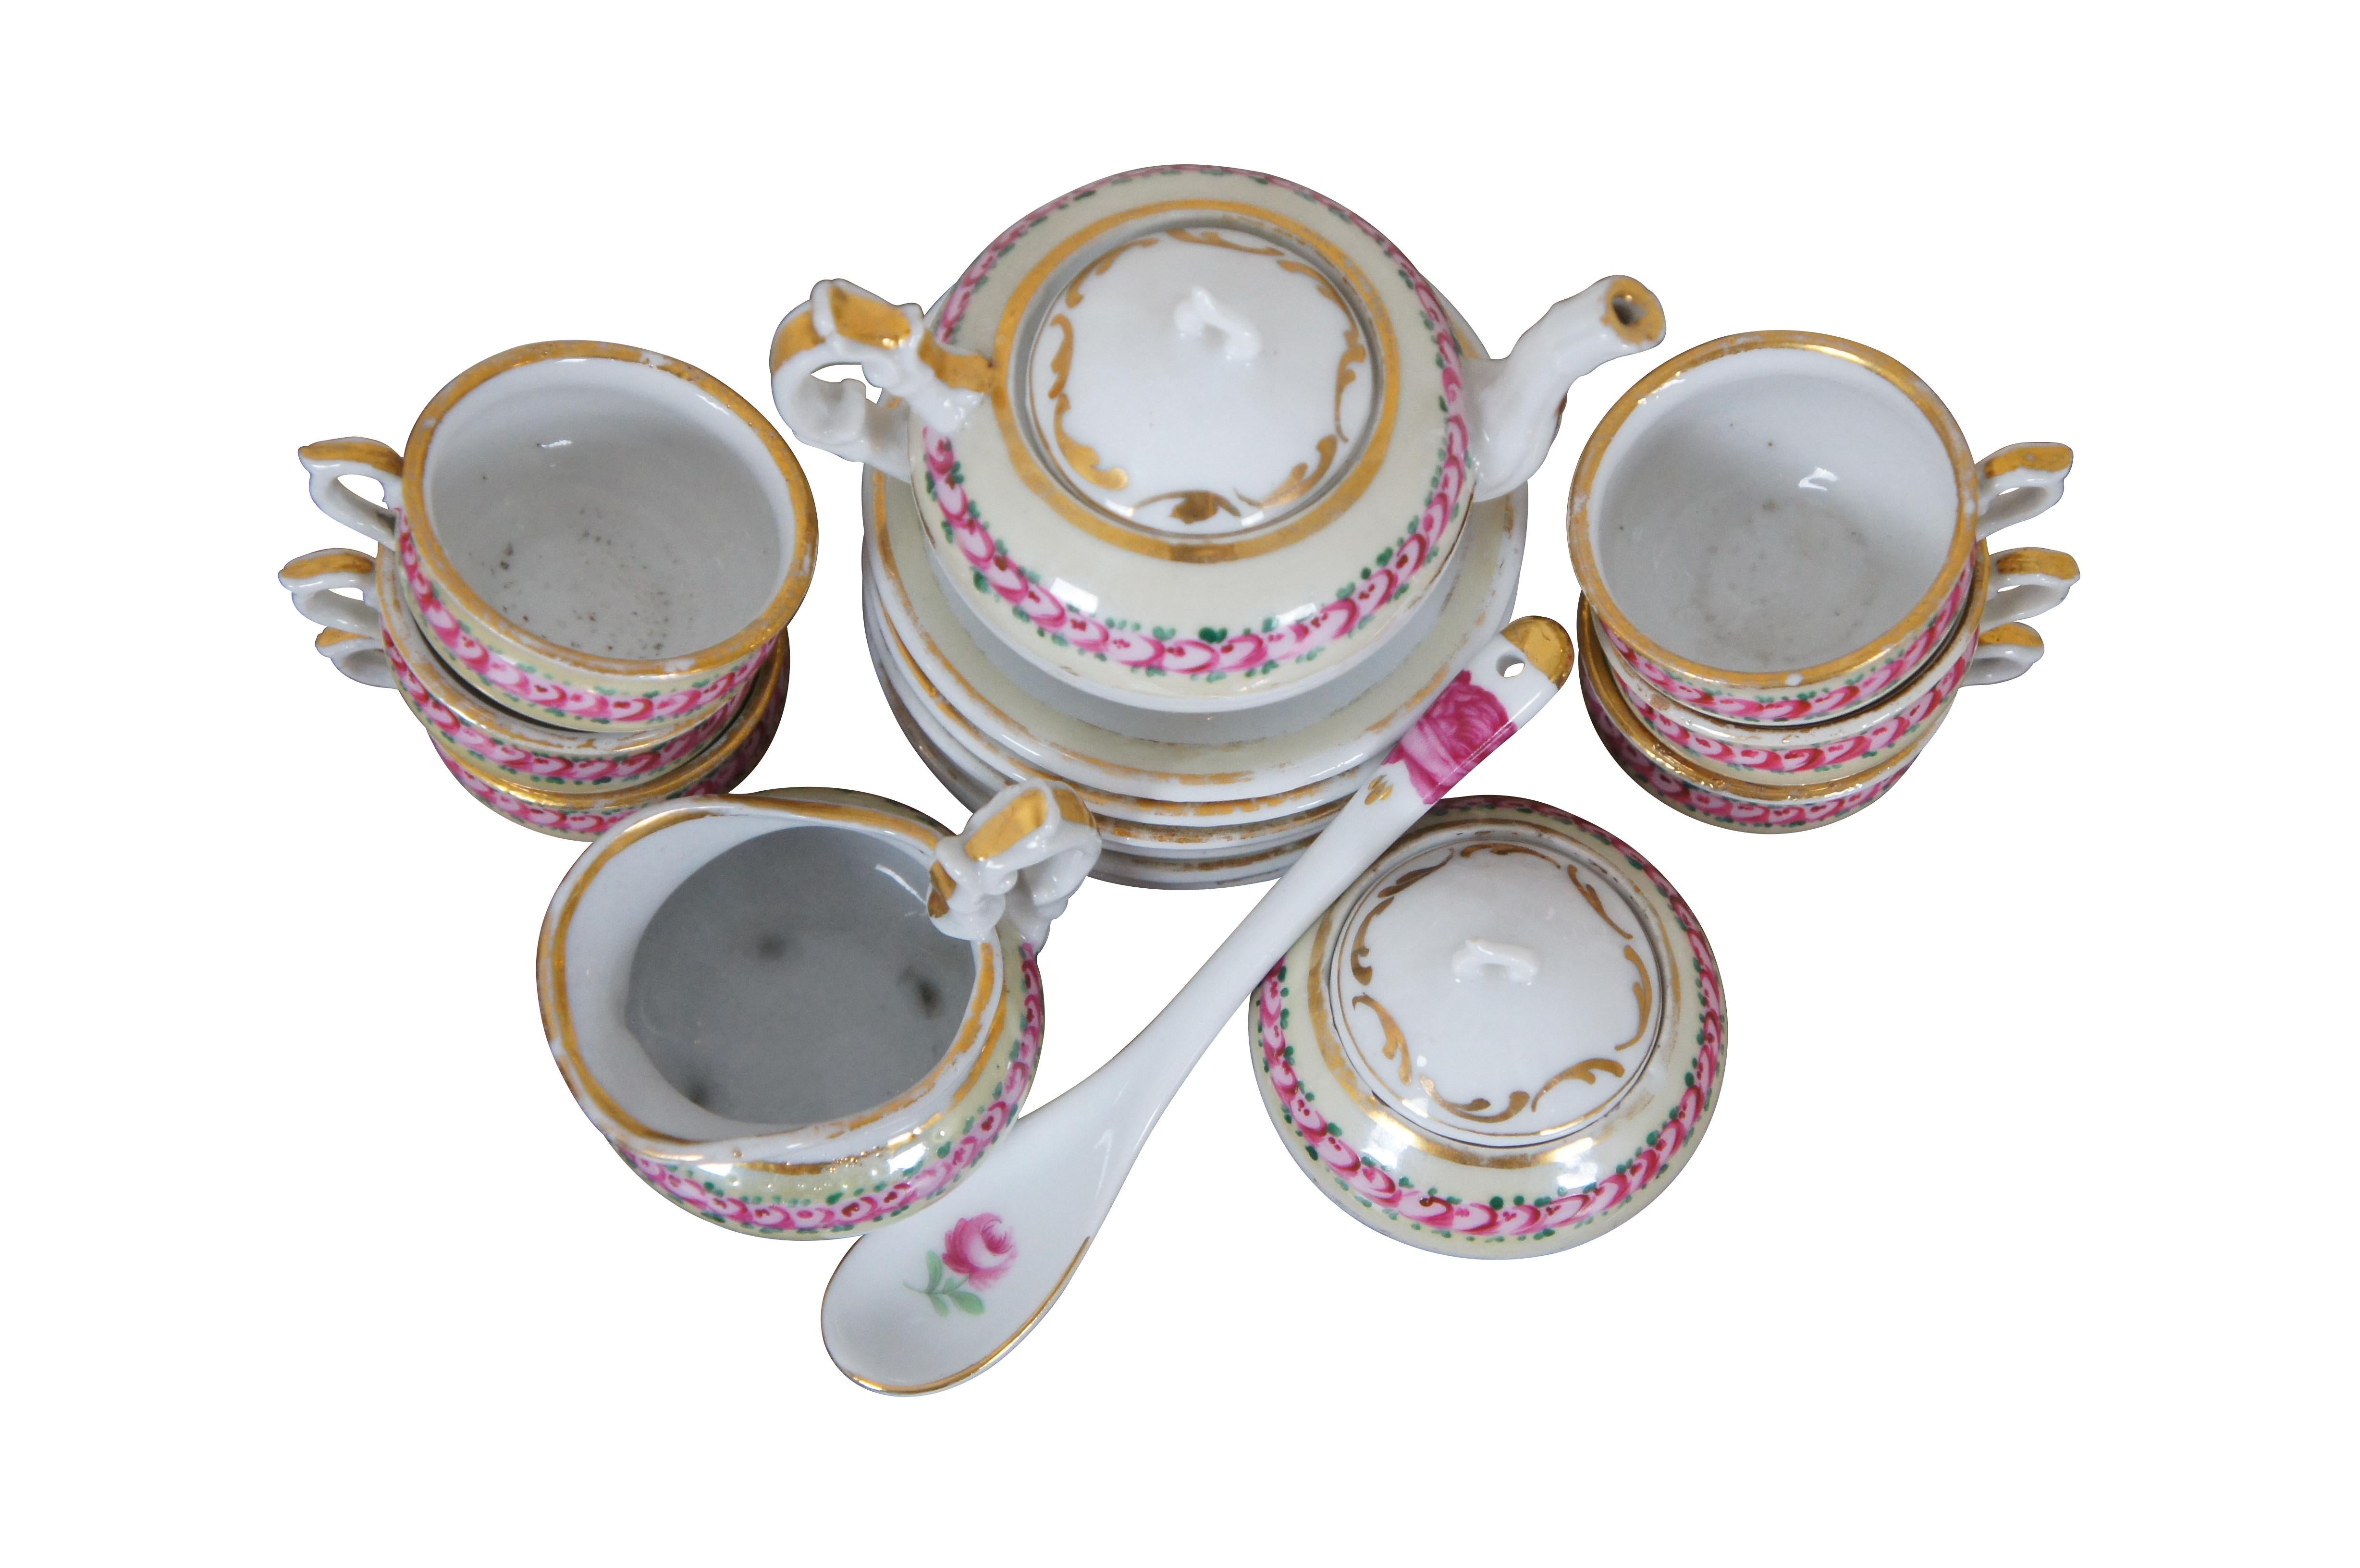 Antique 18 piece child’s miniature / doll sized porcelain tea set, hand painted with pink roses on a cream border with gilded accents. Set includes 6 teacups, 6 saucers, teapot with lid, sugar bowl with lid, creamer, and one coffee spoon. No makers